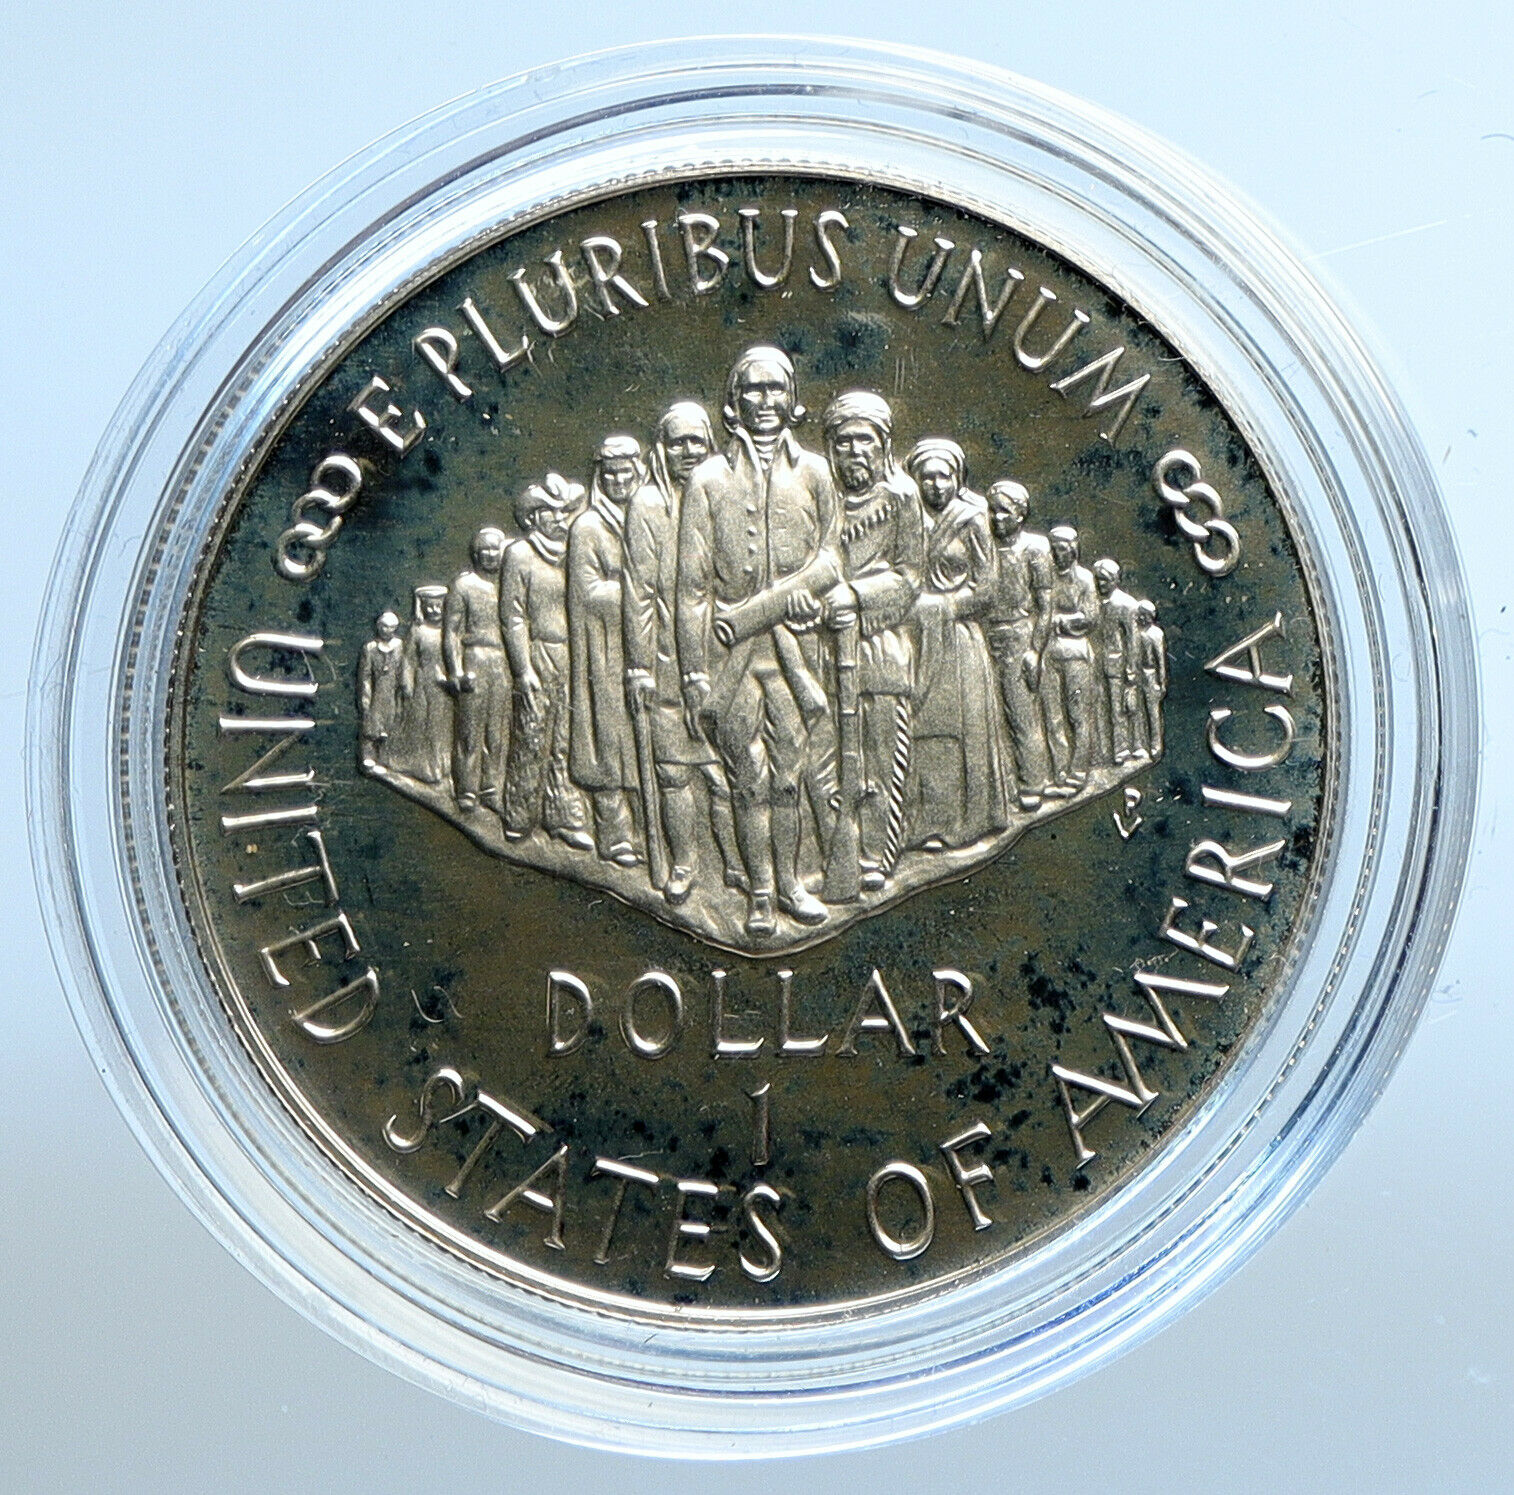 1987 S UNITED STATES Constitution Quill Scroll PROOF SILVER Dollar Coin i111168